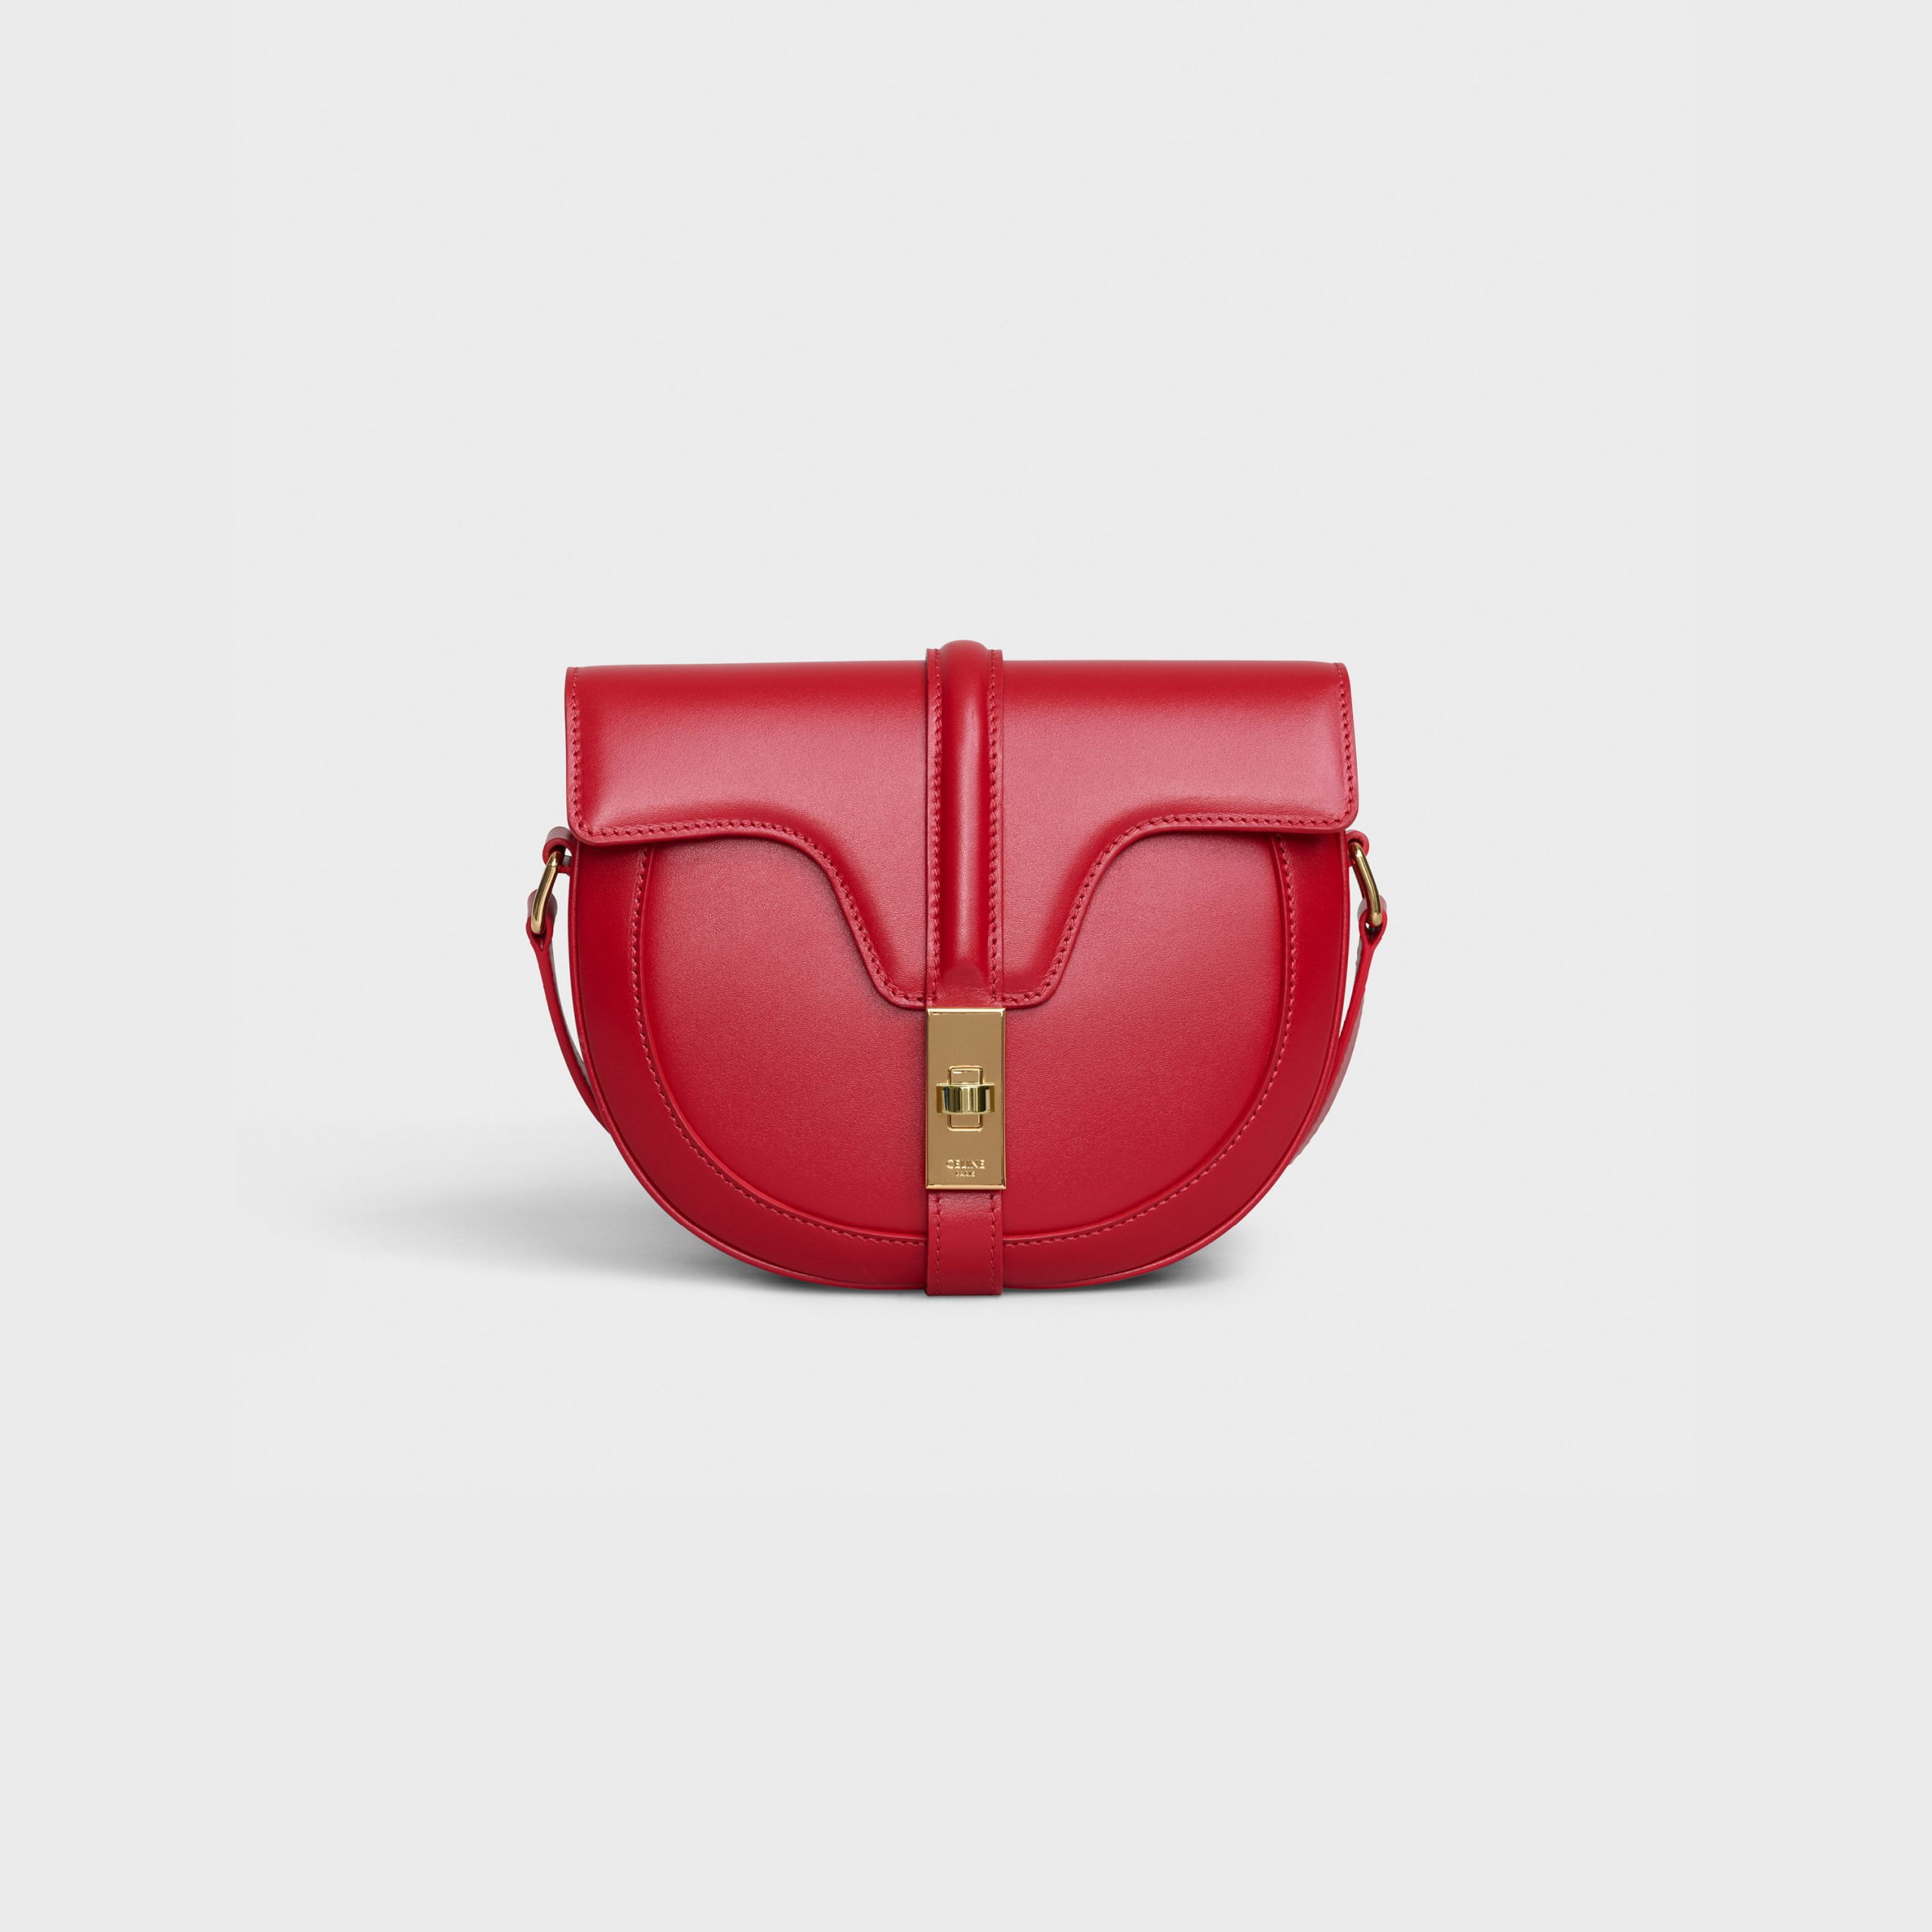 Celine Small Besace 16 Bag In Satinated Calfskin – Red – 188013BEY.27ED